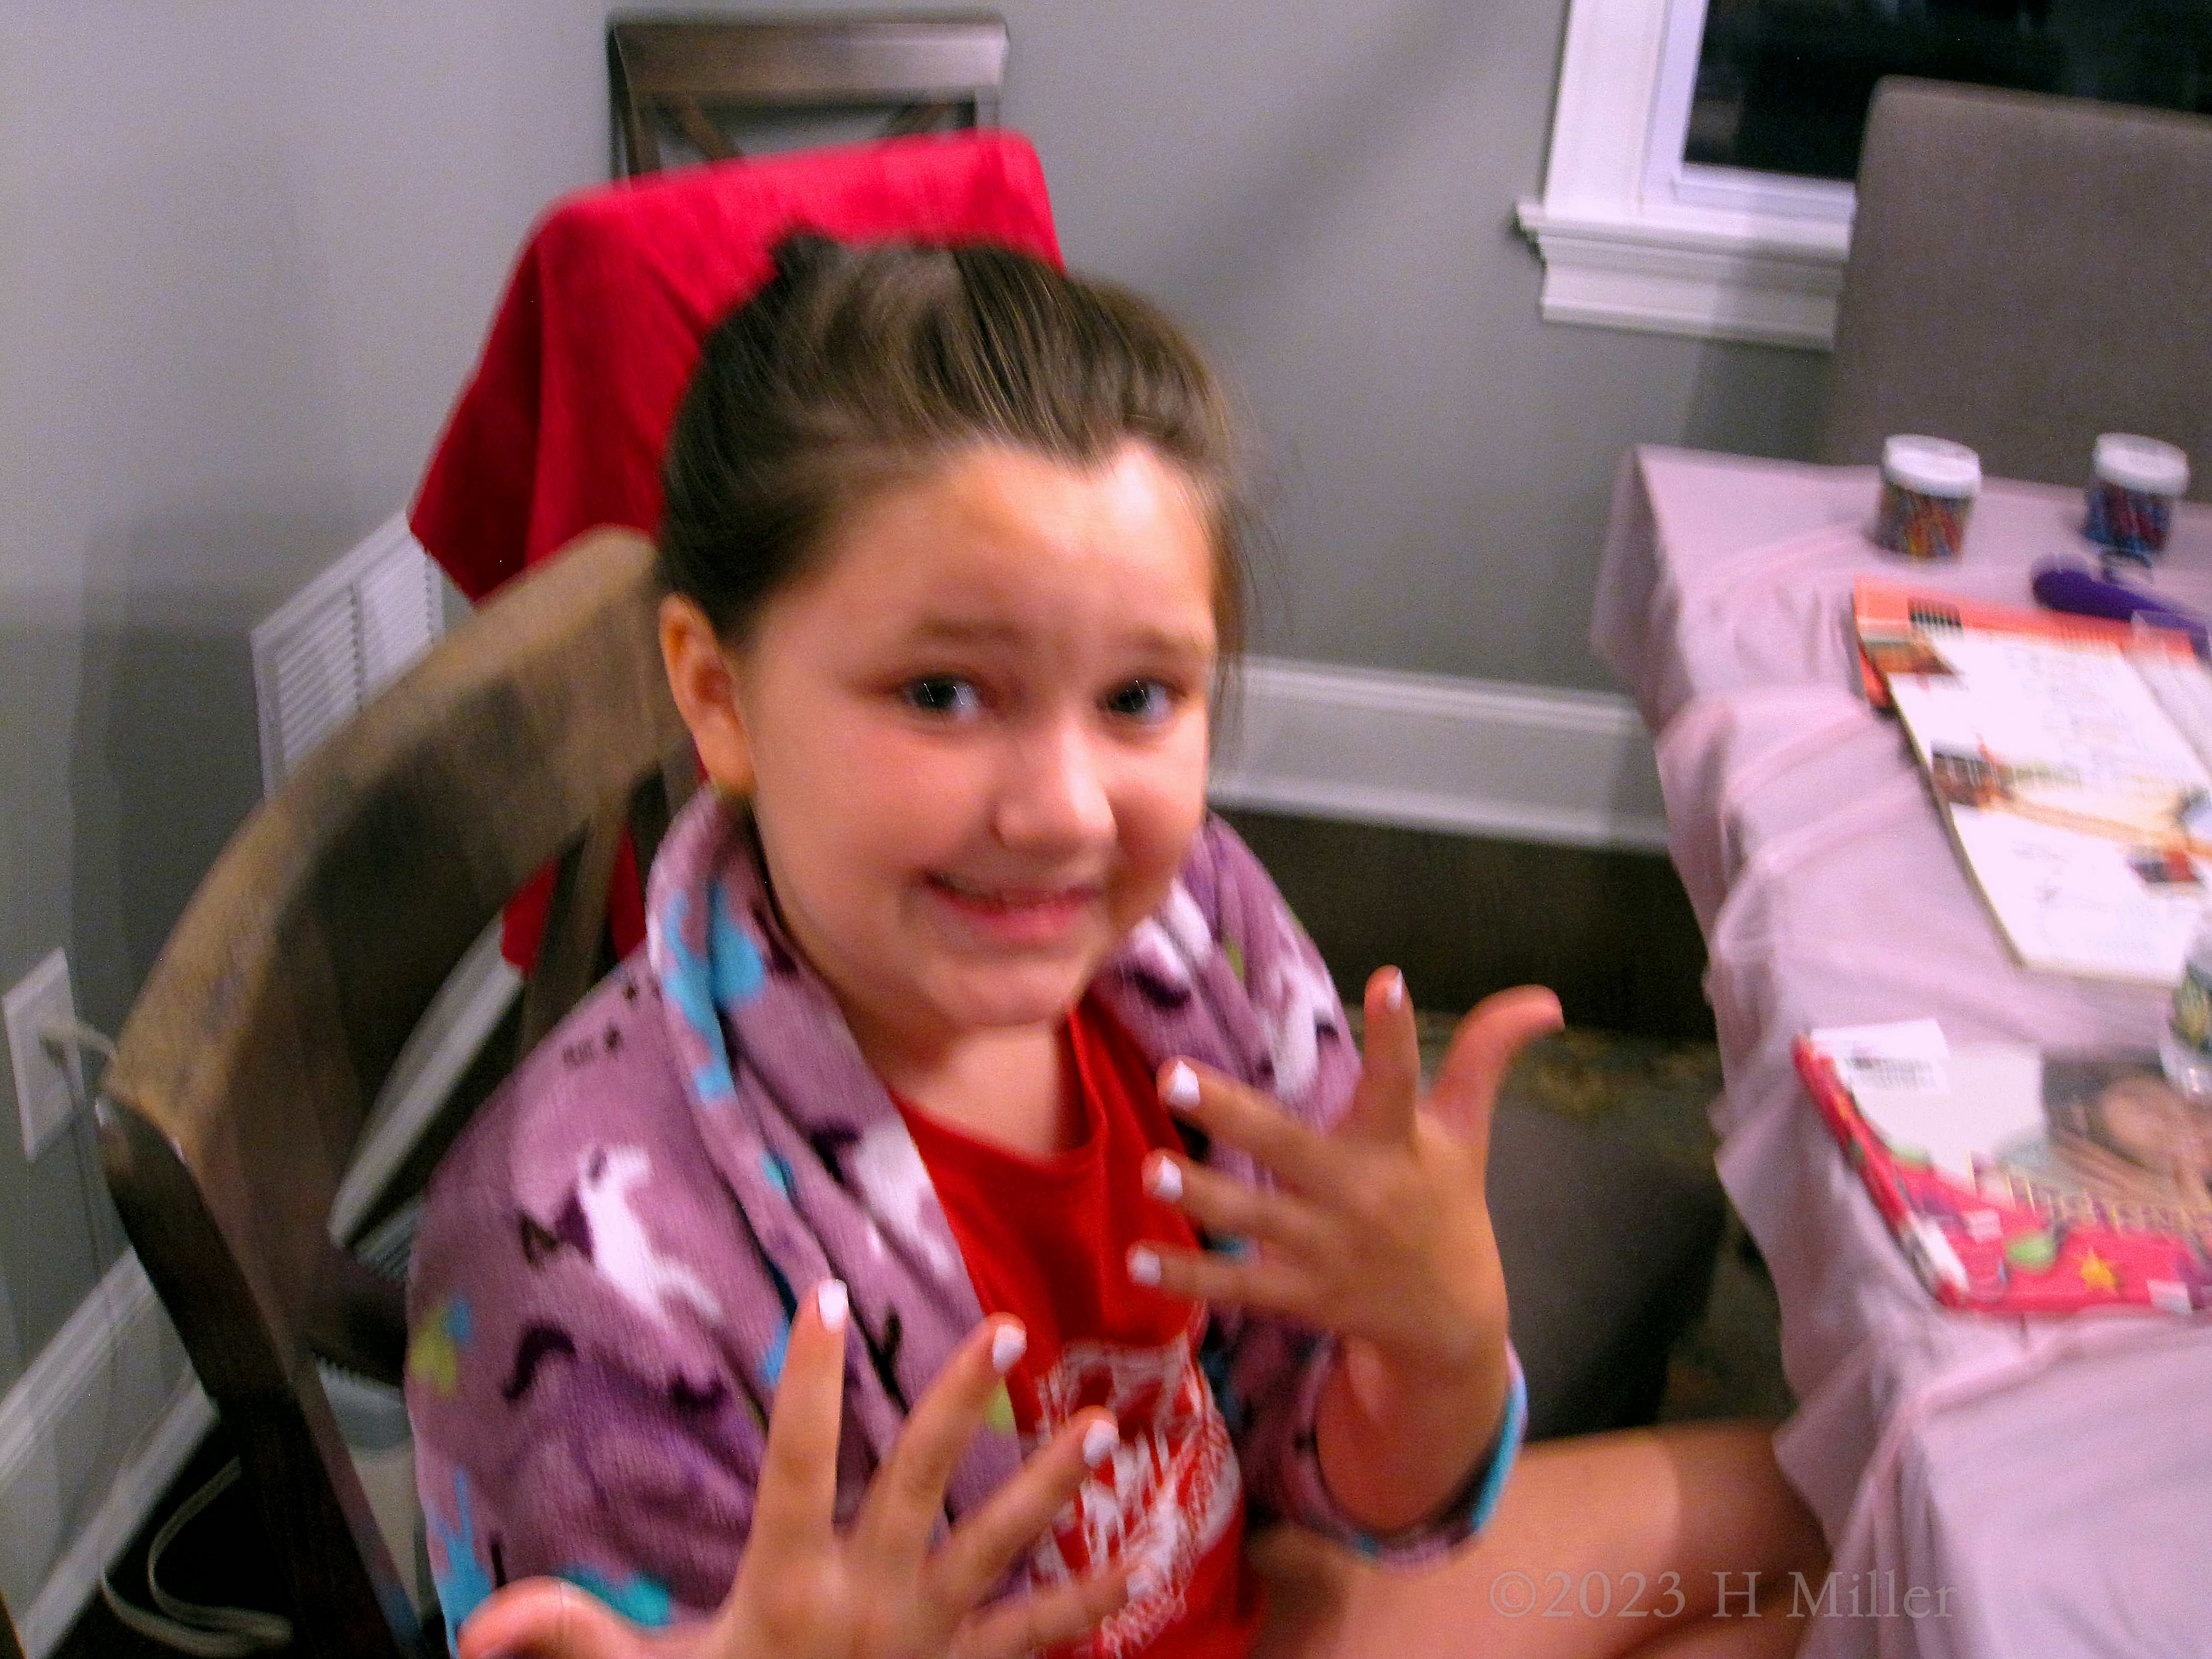 Brenna's 10th Kids Spa Party For Girls! Gallery 1 